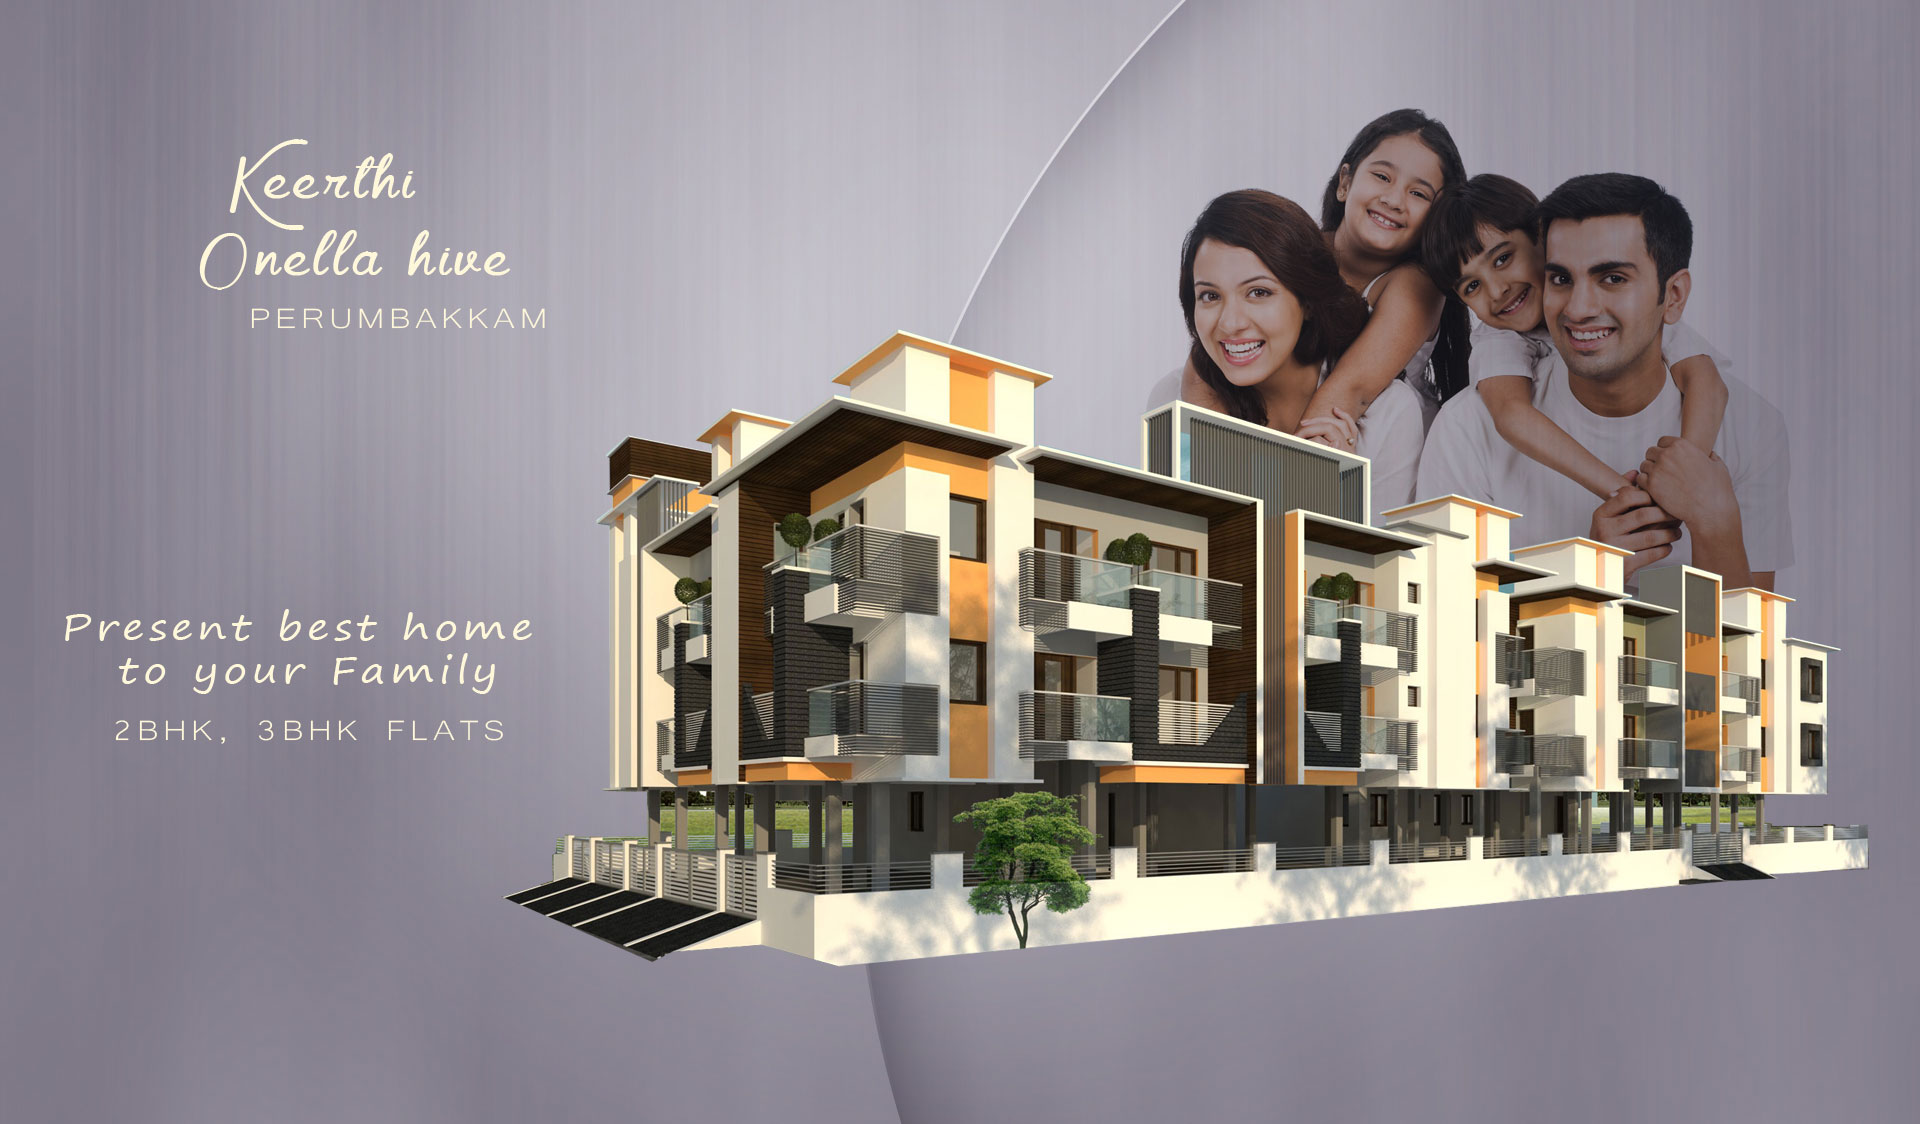 Keerthi Onella Hive offers a luxury home as well as a place of solace and solitude Update